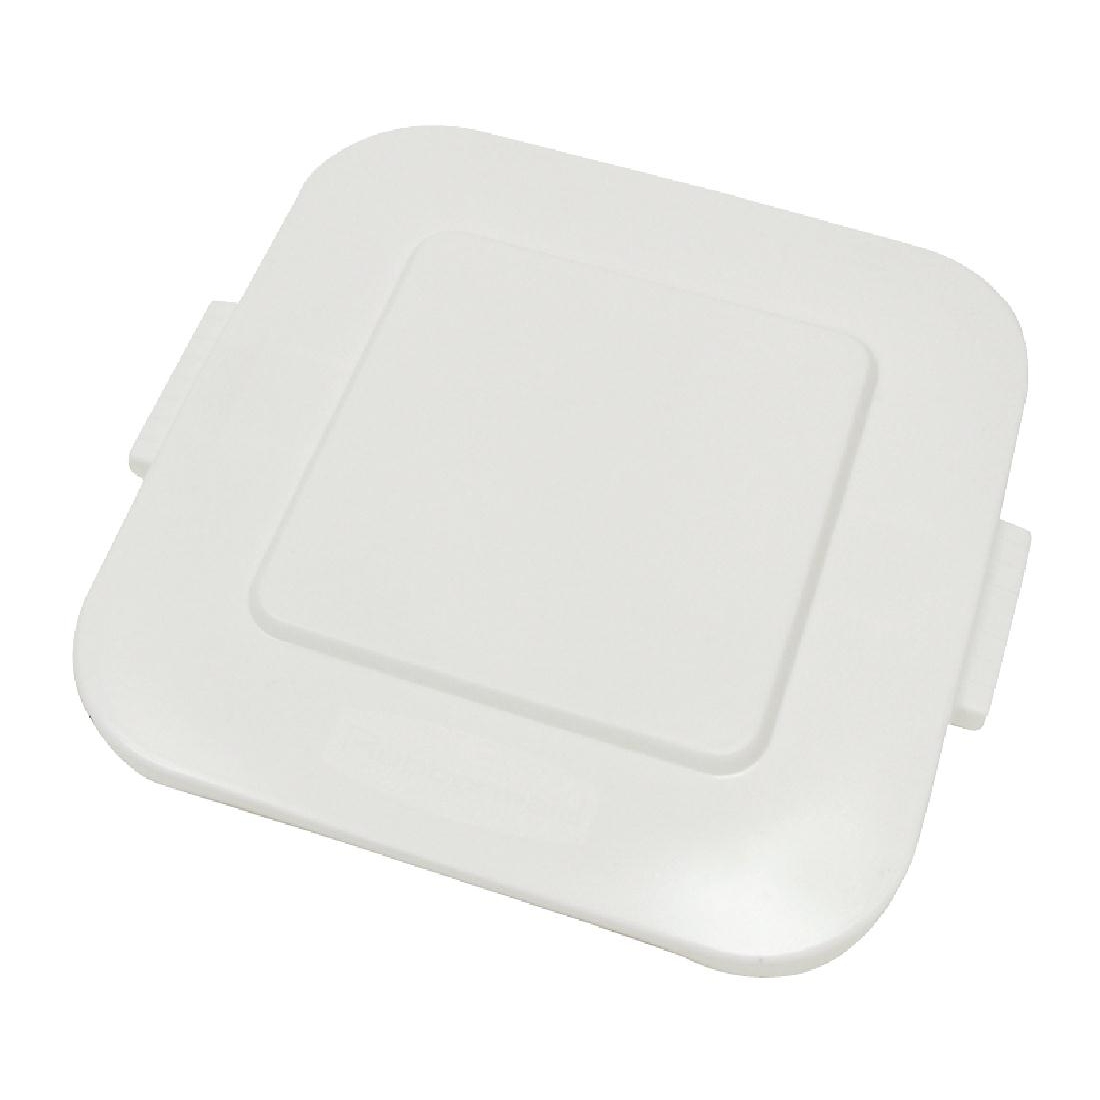 Rubbermaid Brute Square Container Lid